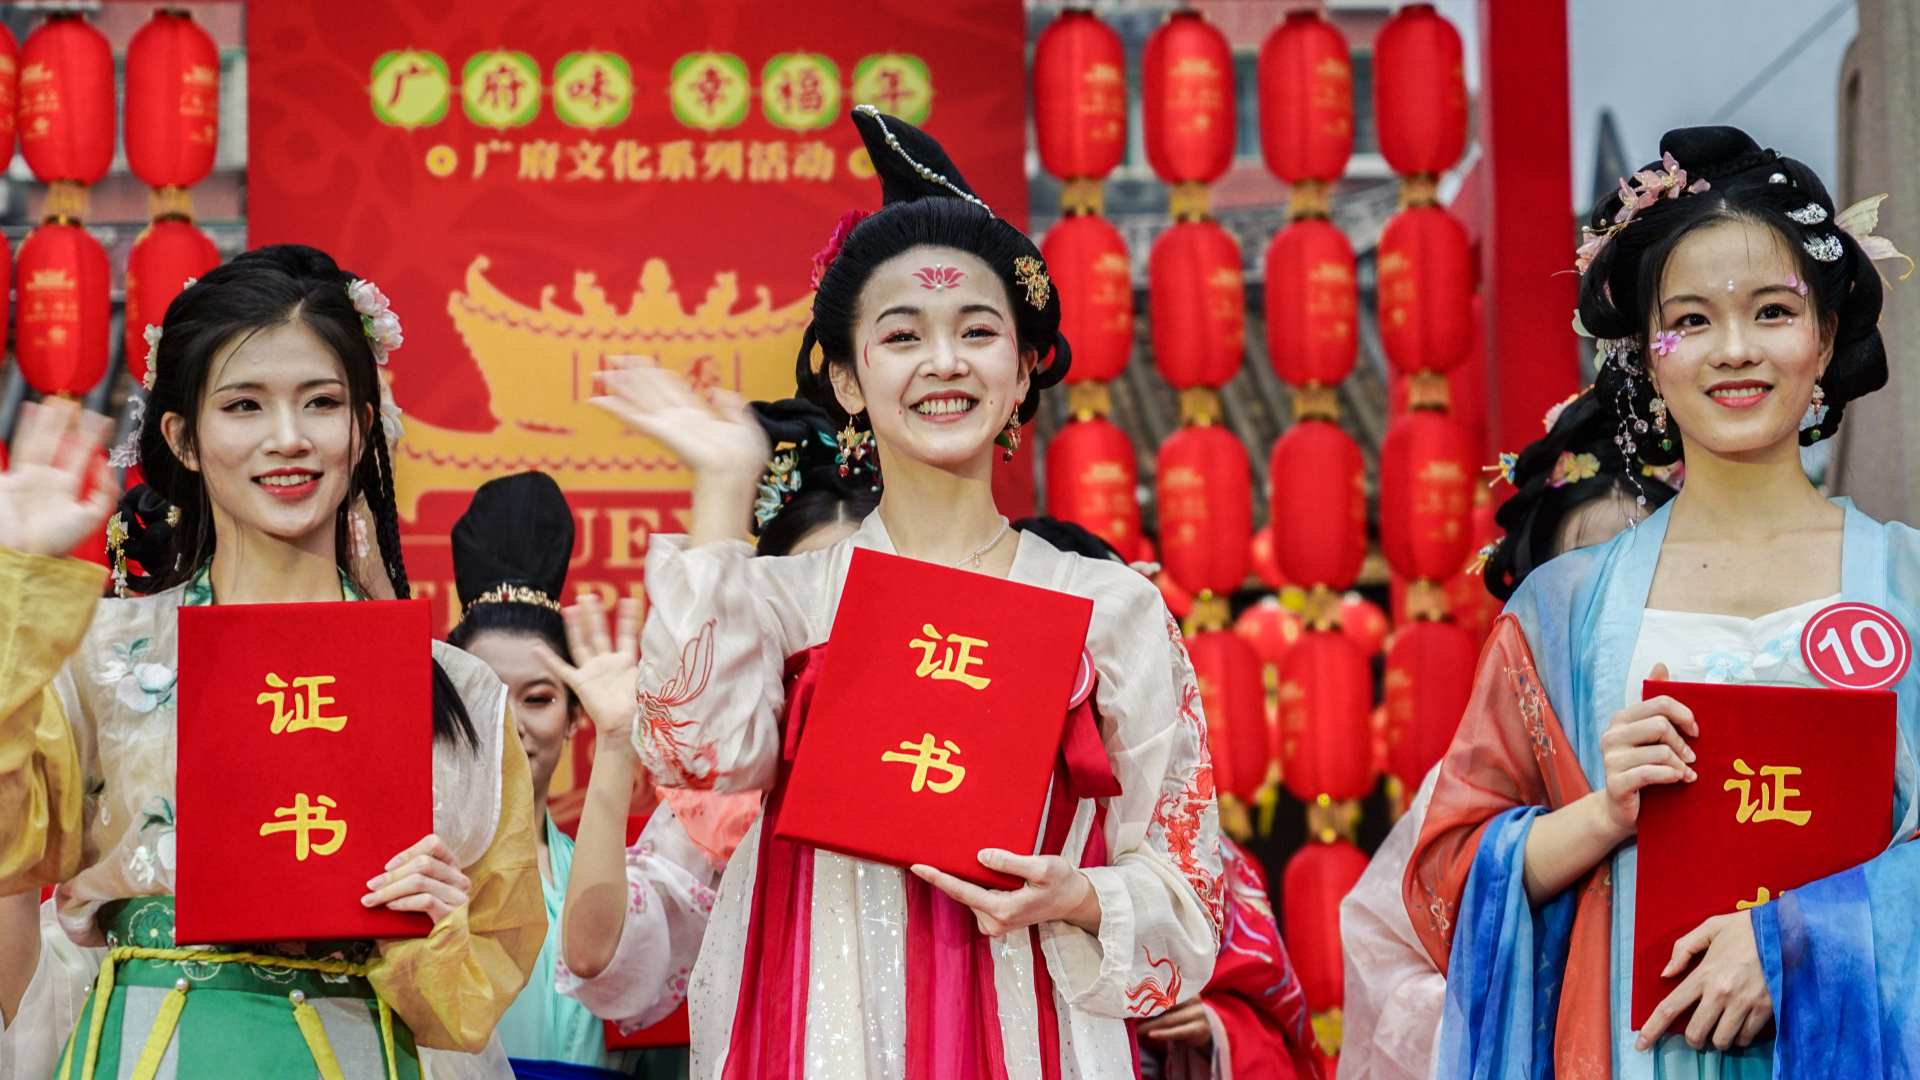 A beauty contest brings you back to ancient Guangzhou